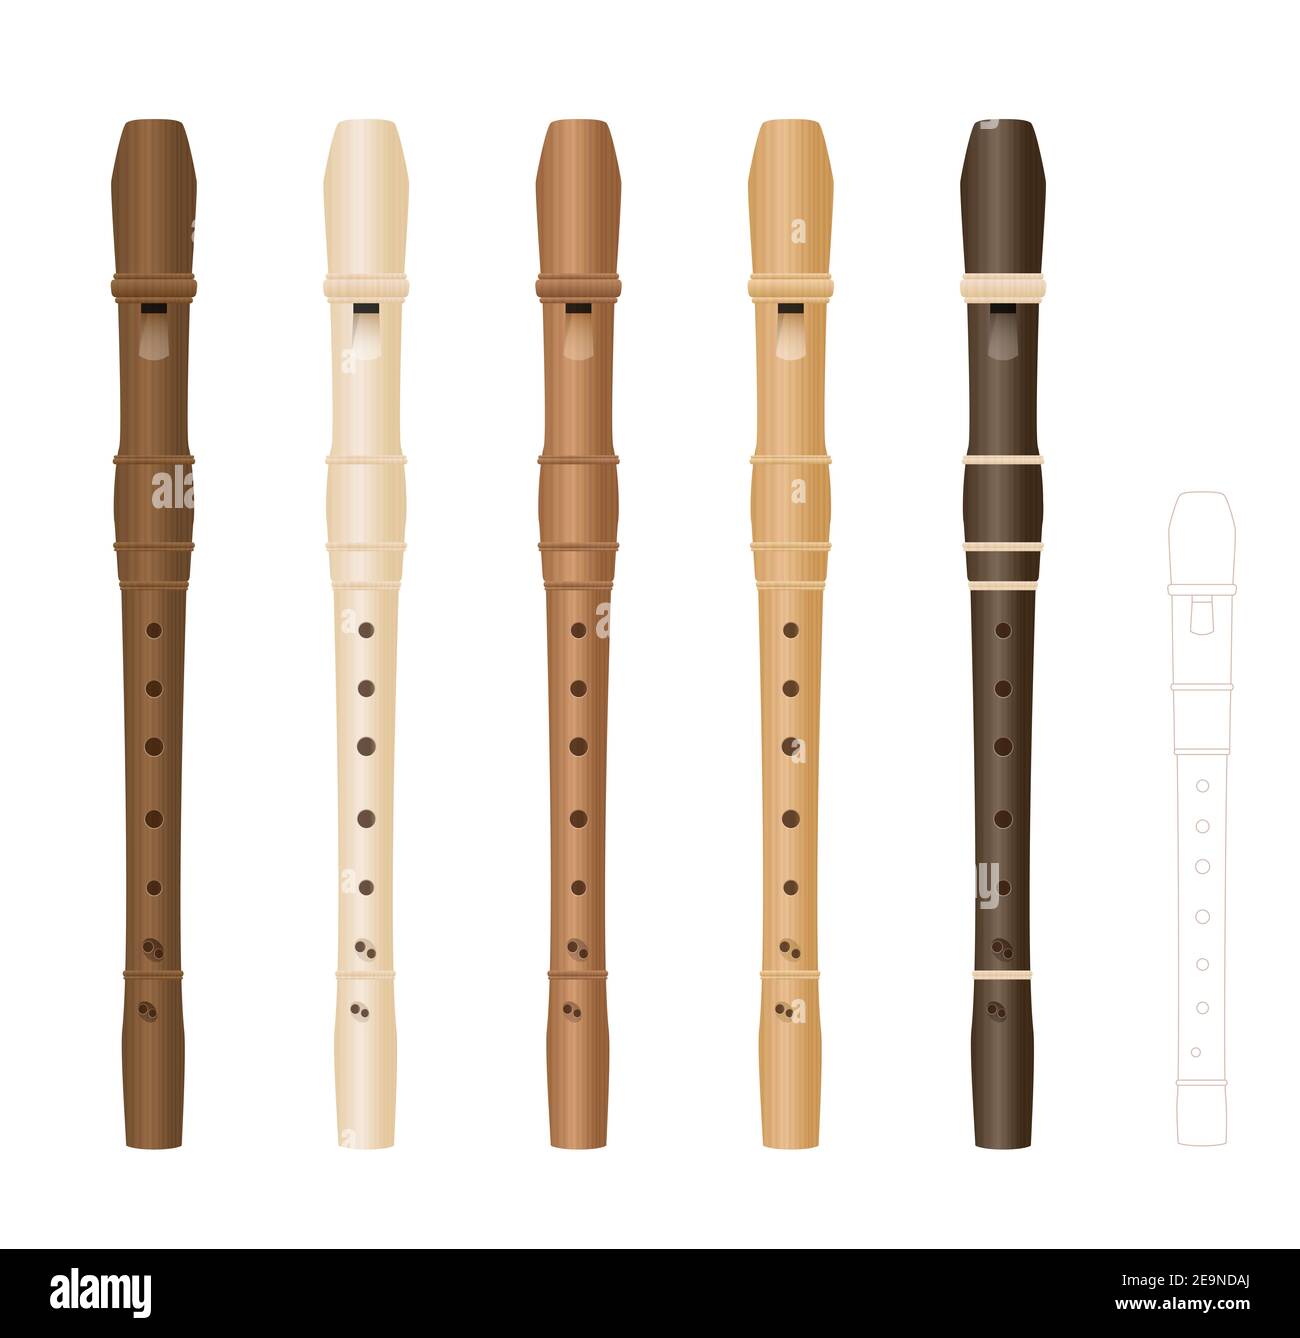 Alto recorders, different wooden textures and colors, realistic three-dimensional music instruments, with smaller soprano recorder by comparison. Stock Photo